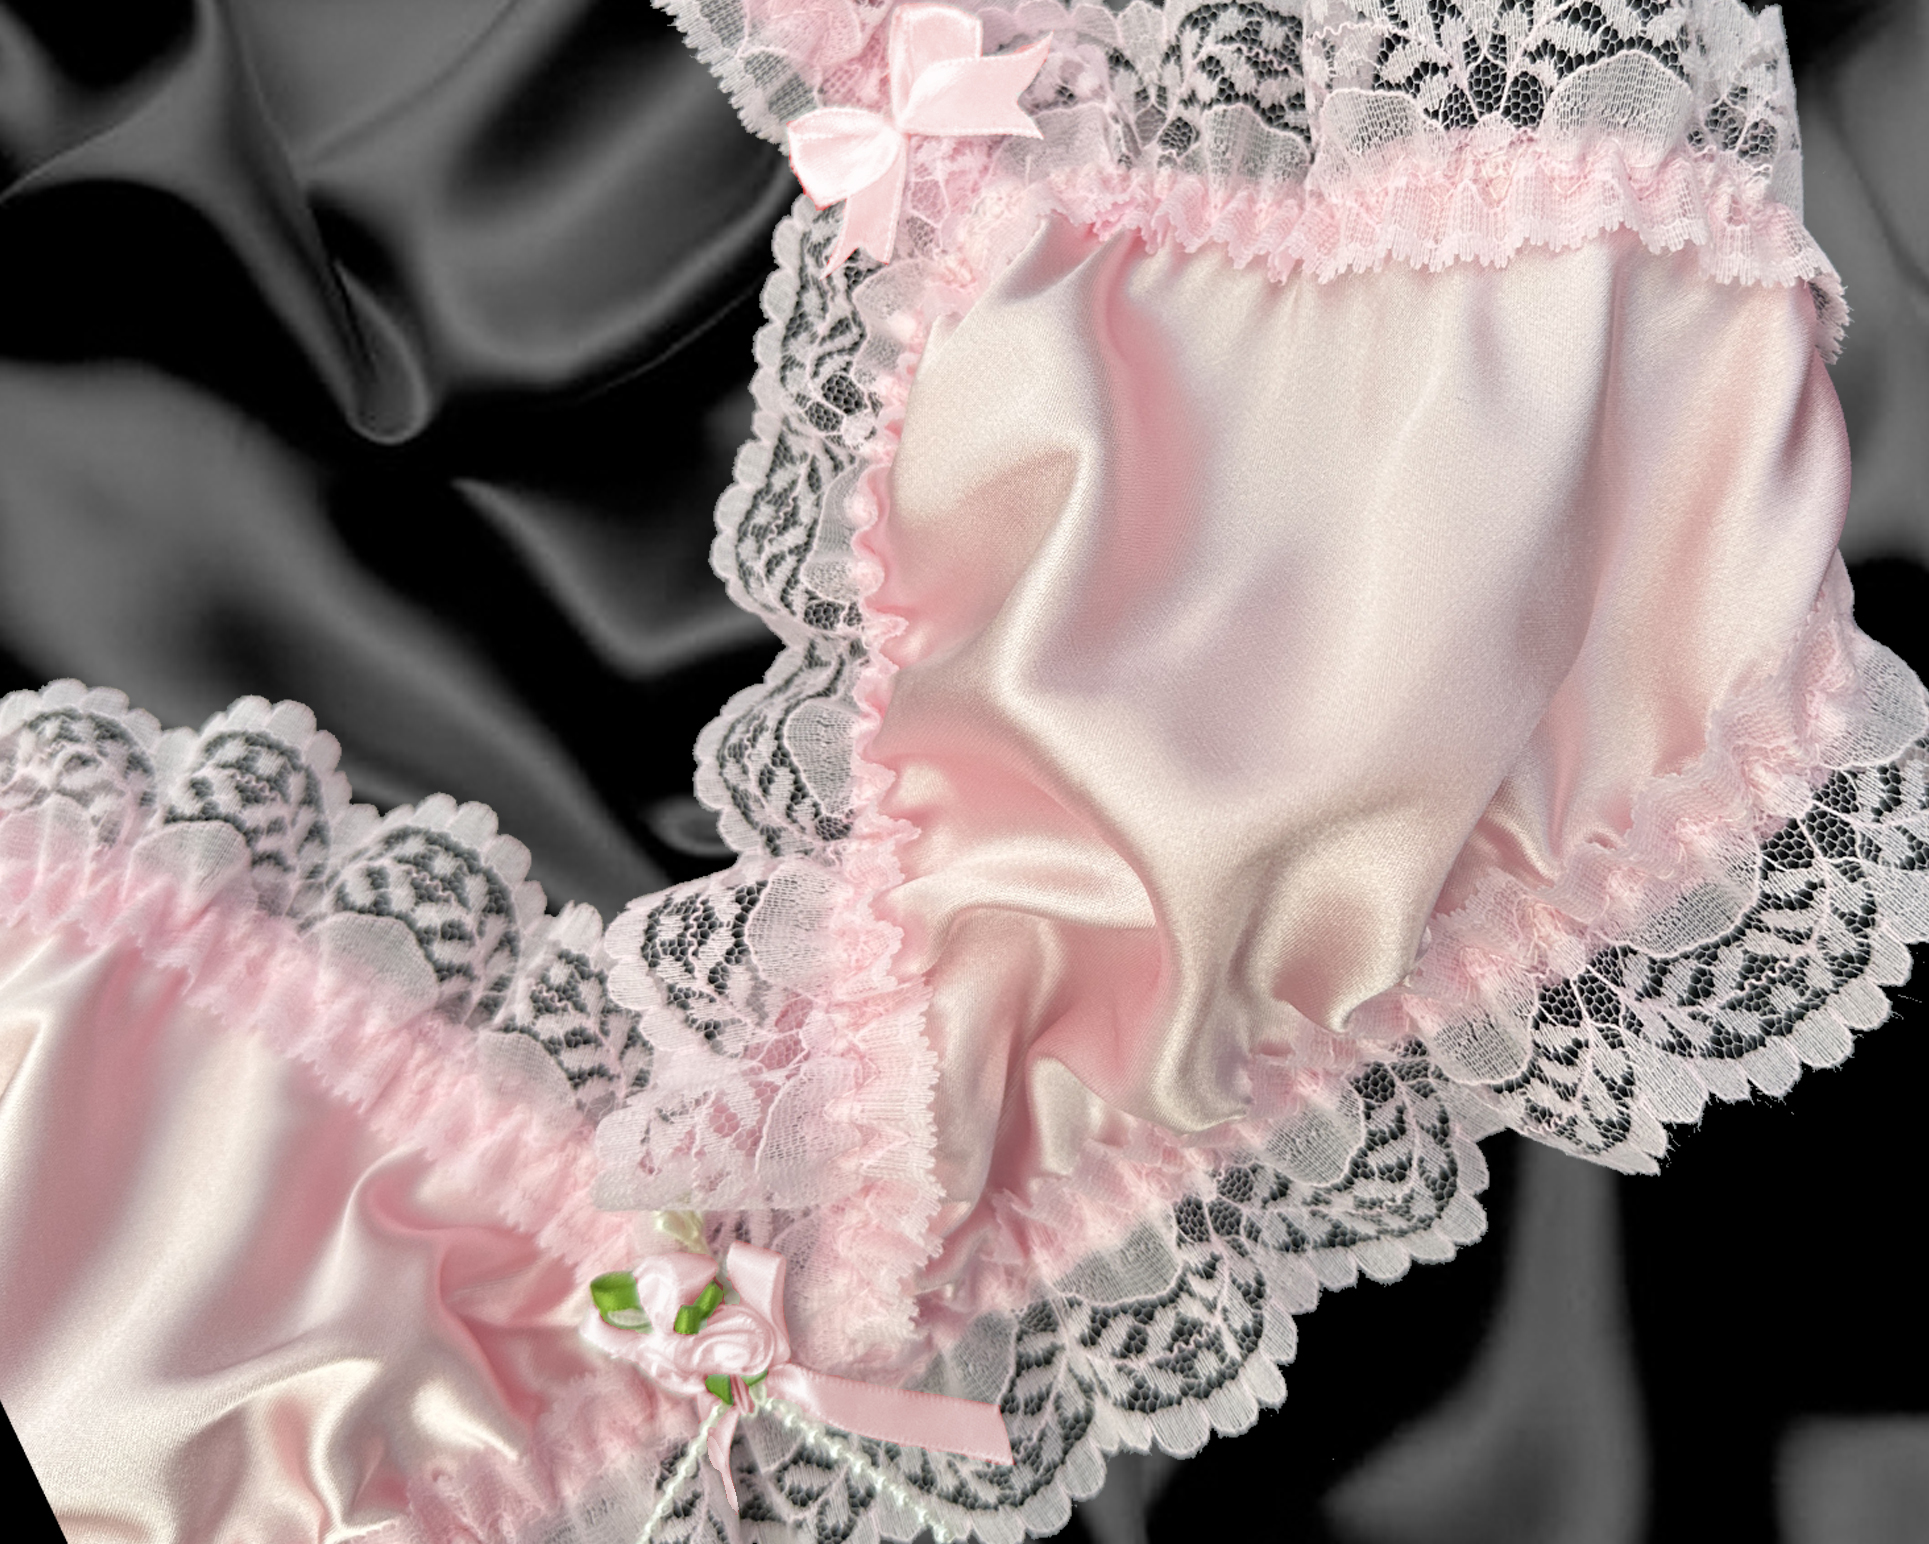 Sissy Satin Frilly Lacy Fitted Pull On Bra Bralette Roses Pearls